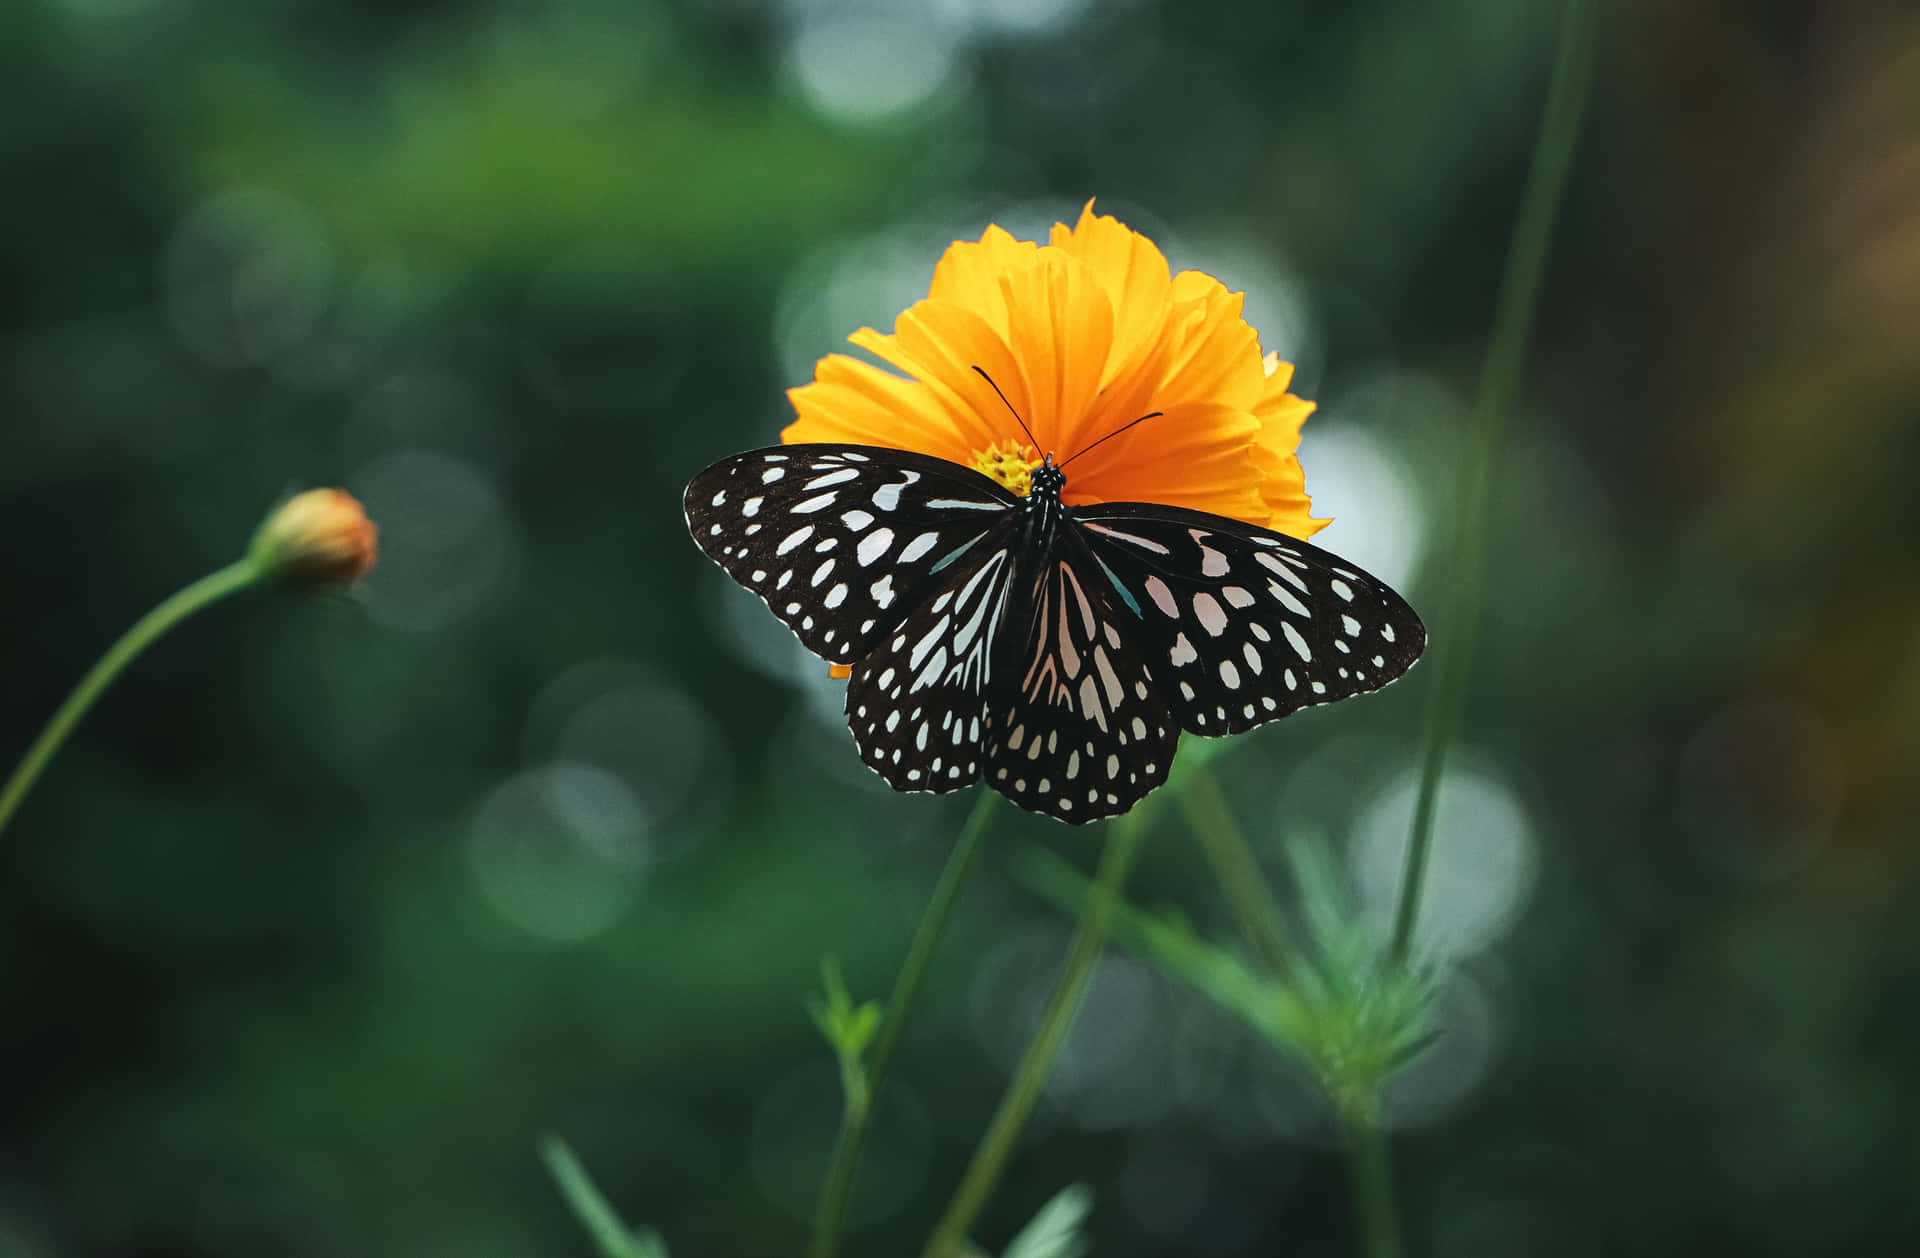 Brighten your day with the beauty and magic of a Monarch Butterfly